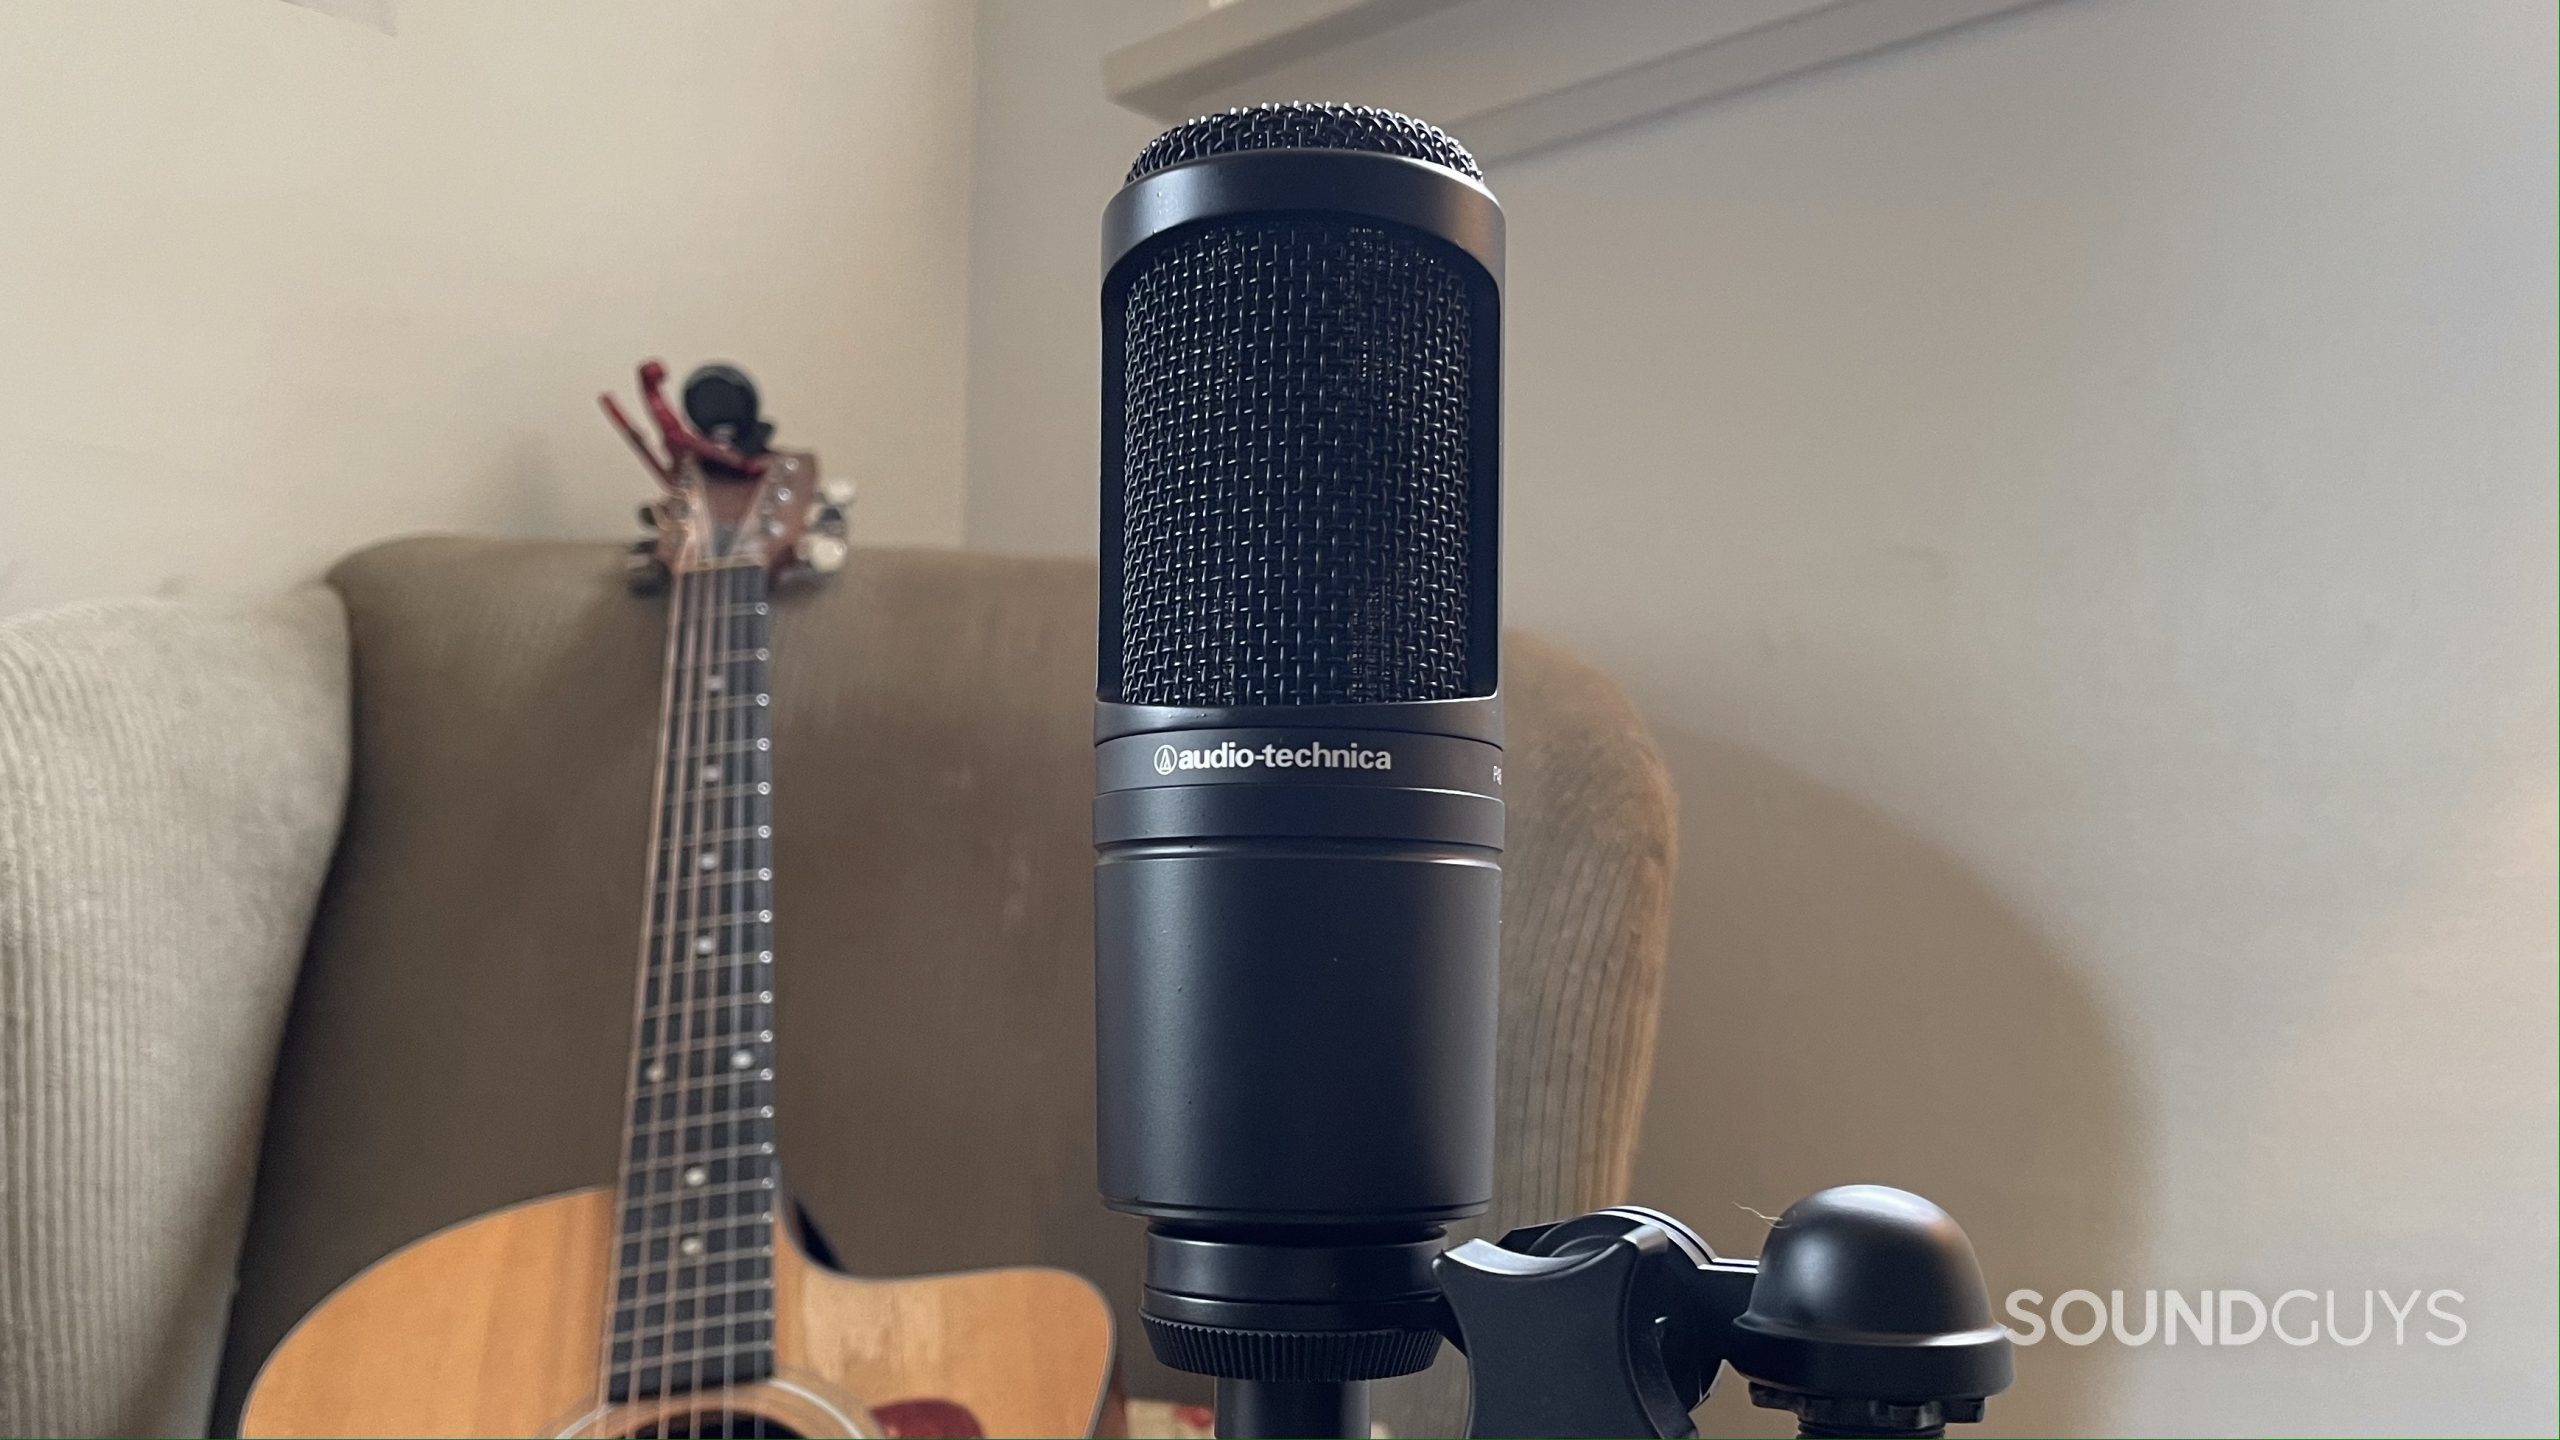 Audio-Technica AT2020 with an acoustic guitar resting on an armchair in the background.